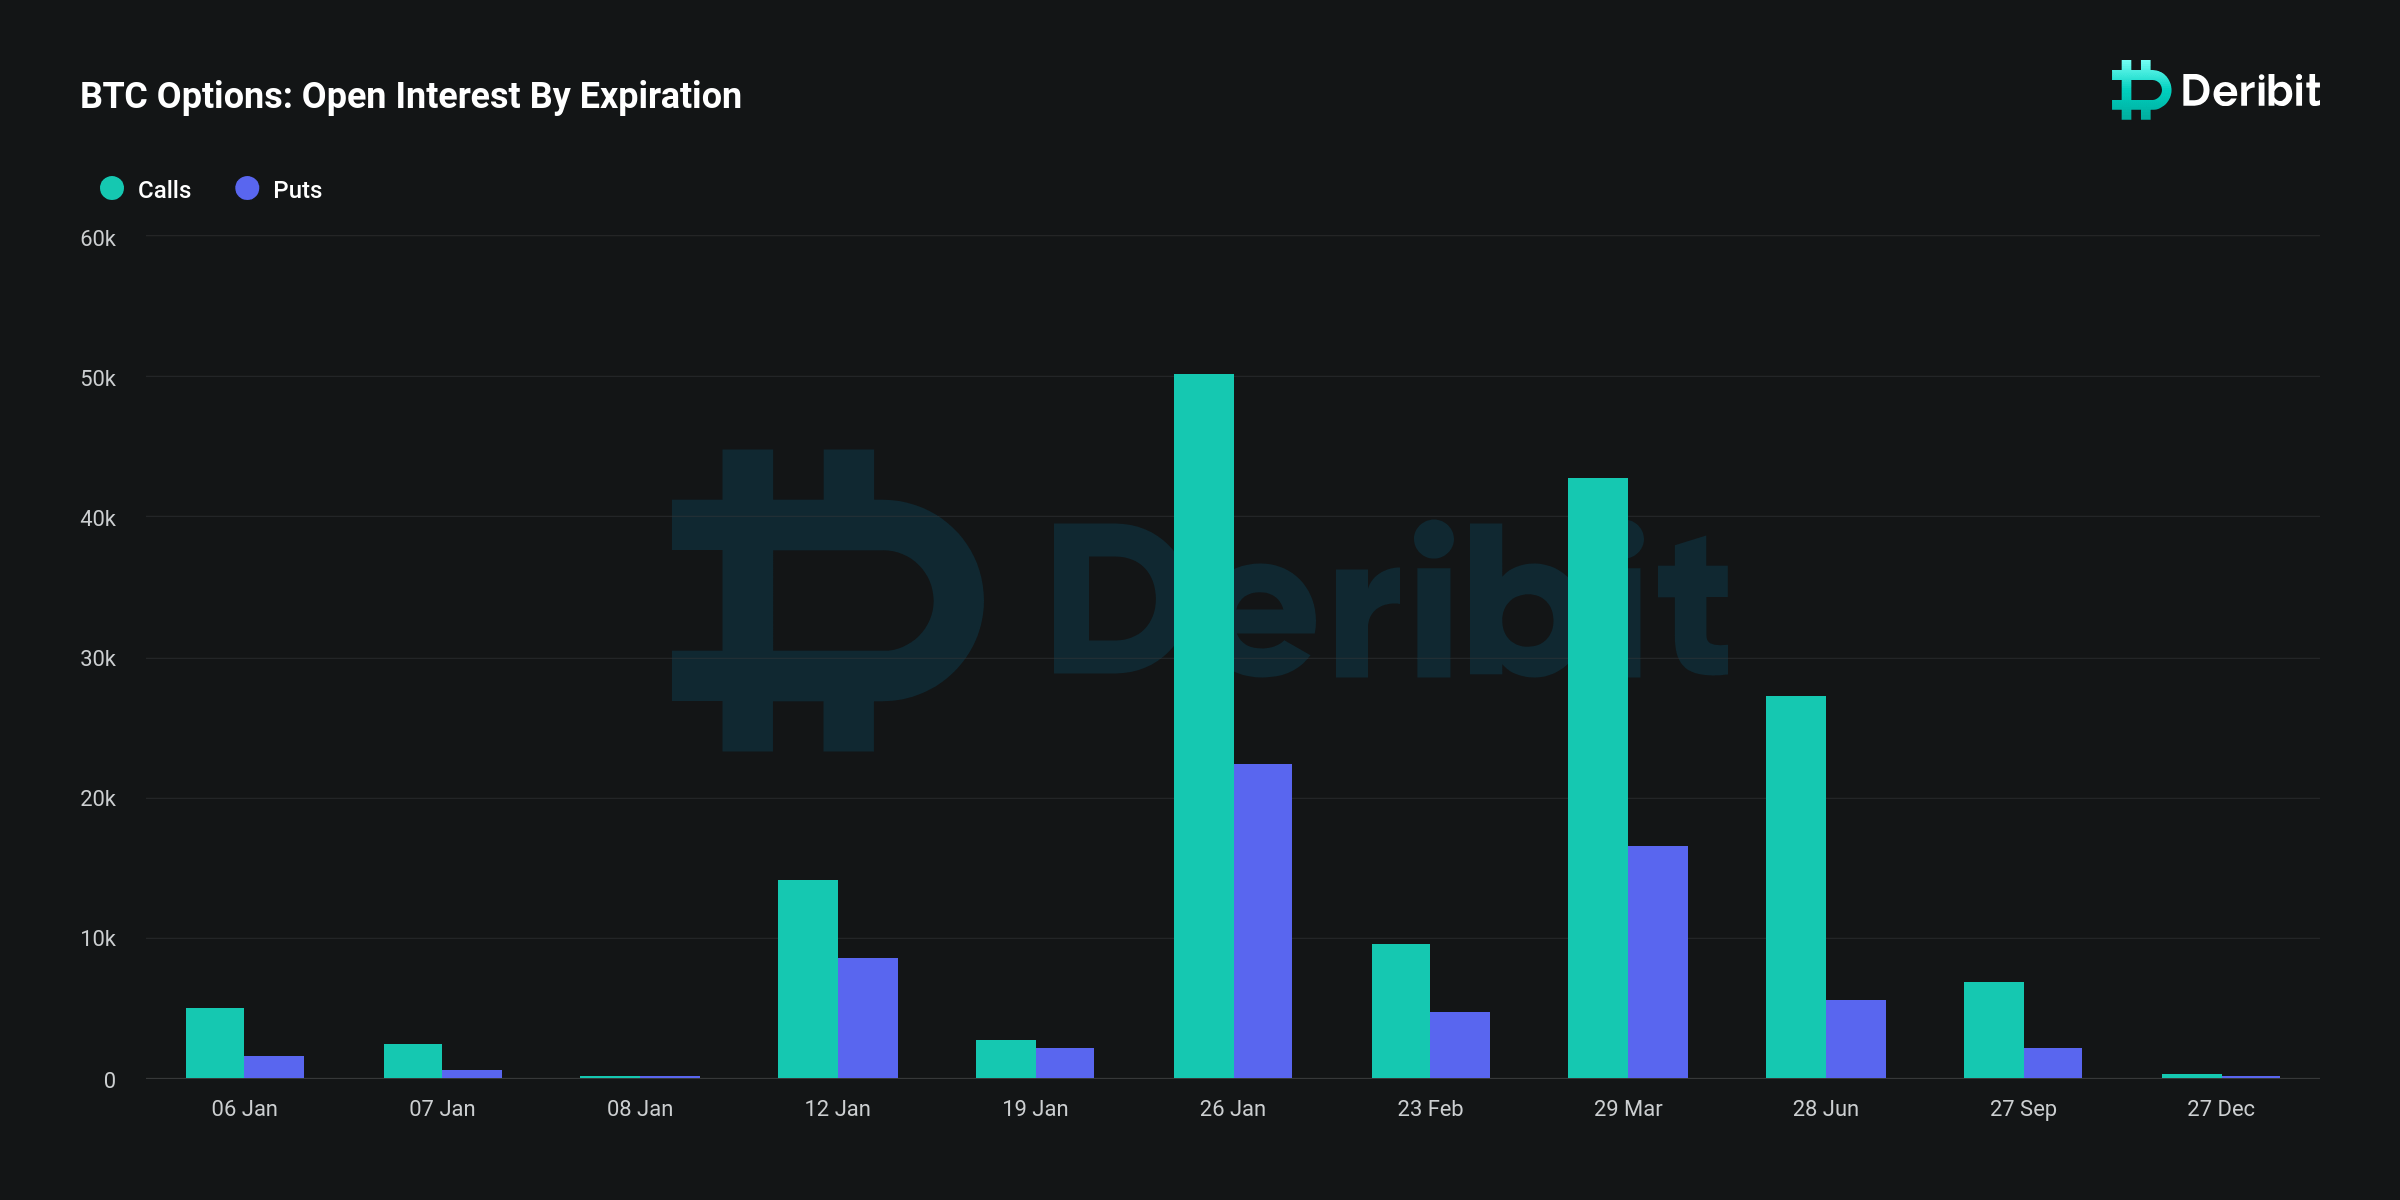 bitcoin options open interest by expiration date